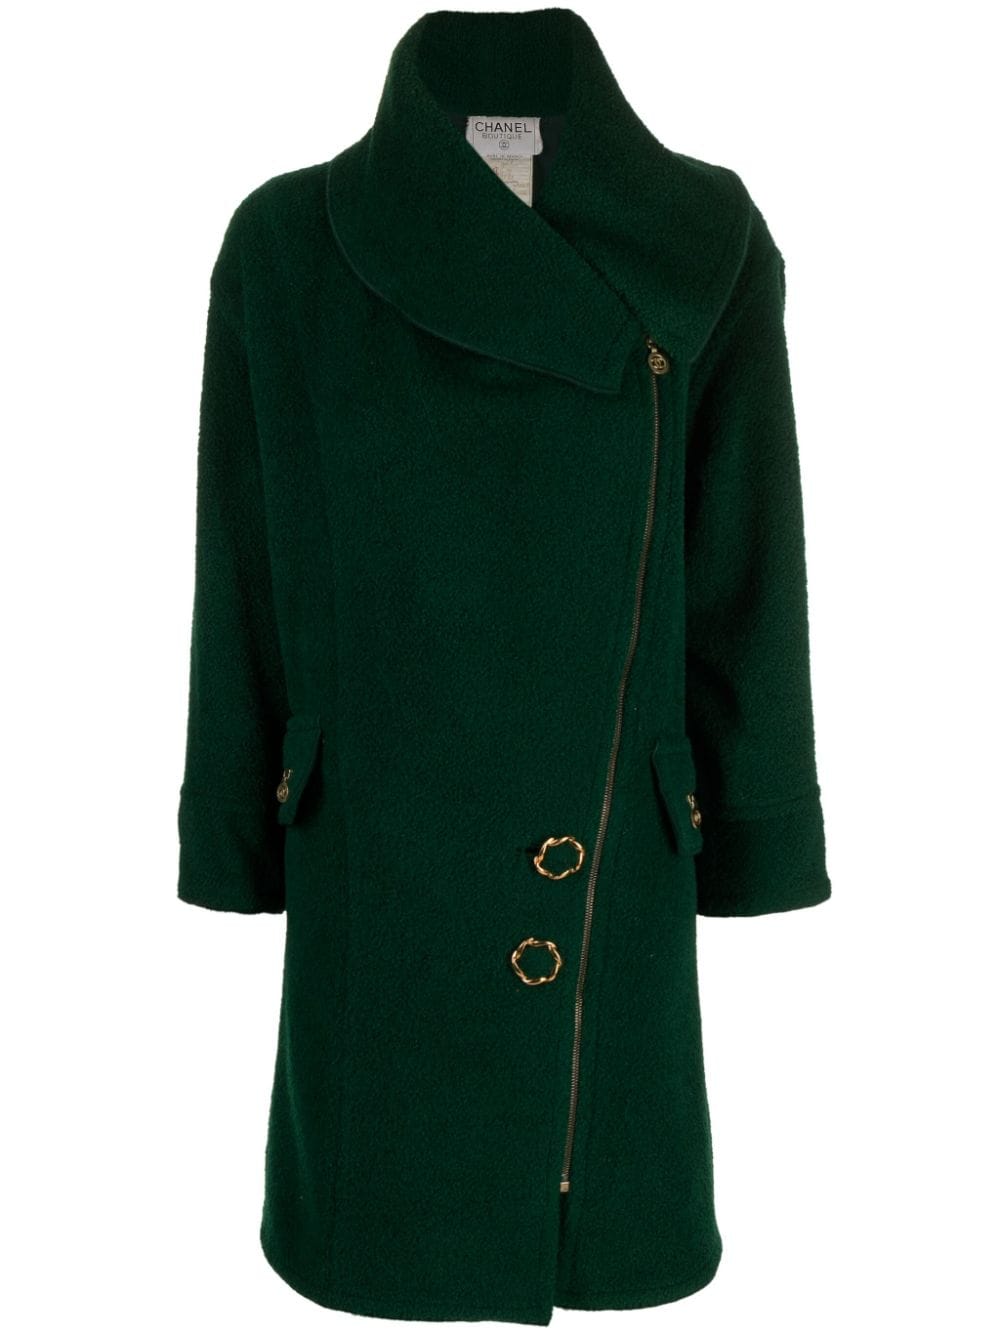 Image 1 of CHANEL Pre-Owned Cappotto asimmetrico 1994